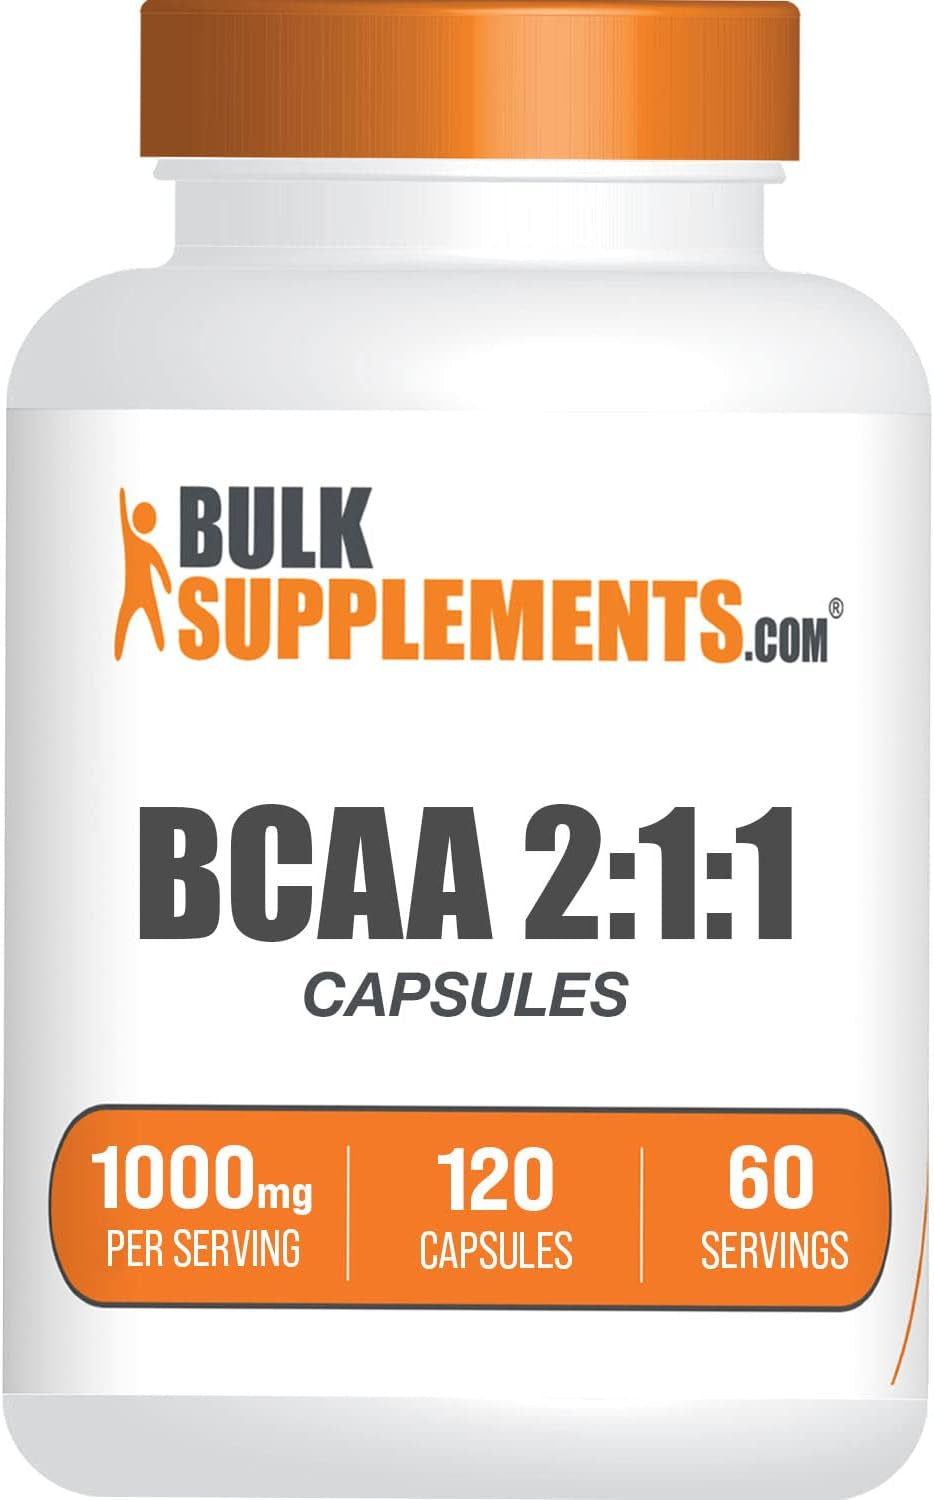 BULKSUPPLEMENTS.COM BCAA 2:1:1 Capsules - Branched Chain Amino Acids, BCAA Supplements, BCAA Capsules - BCAA 1000Mg, BCAA Pills - Gluten Free - 2 Capsules for Serving, 120 Capsules